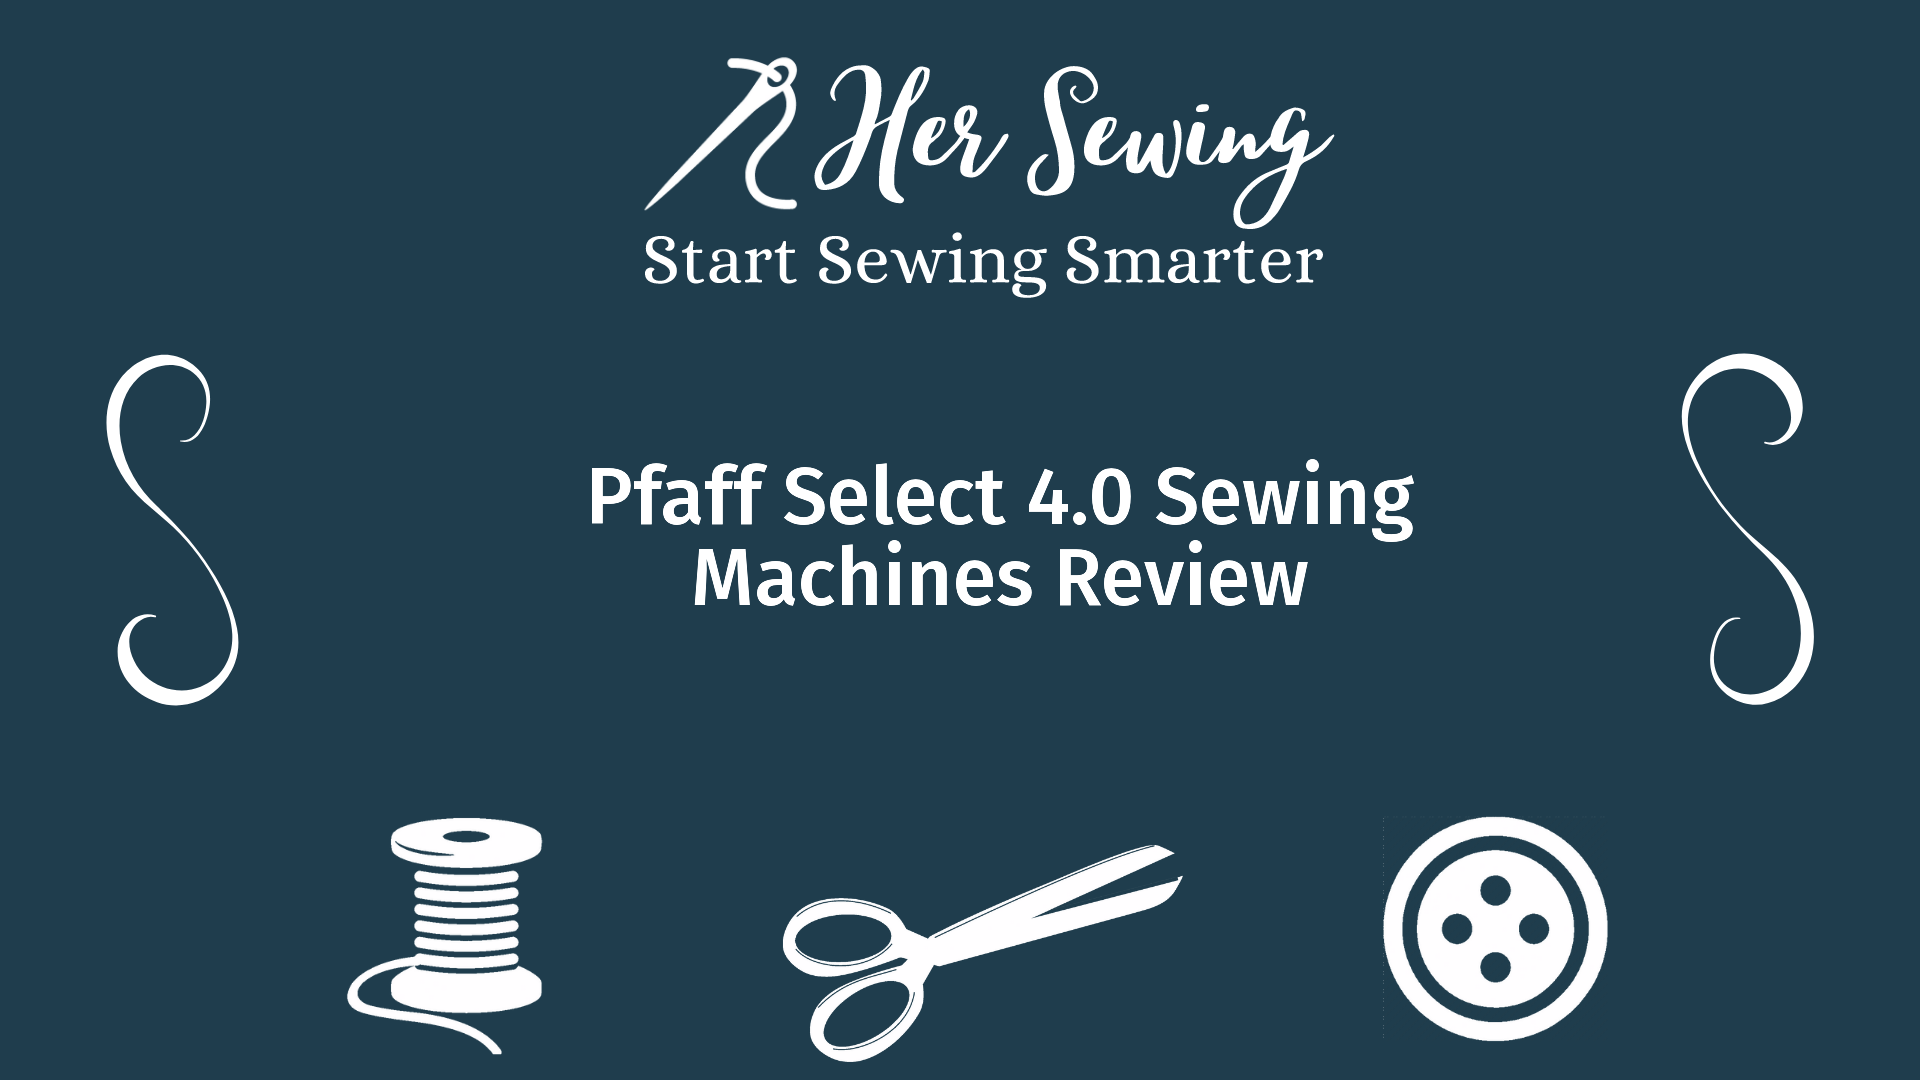 Pfaff Select 4.0 Sewing Machines Review